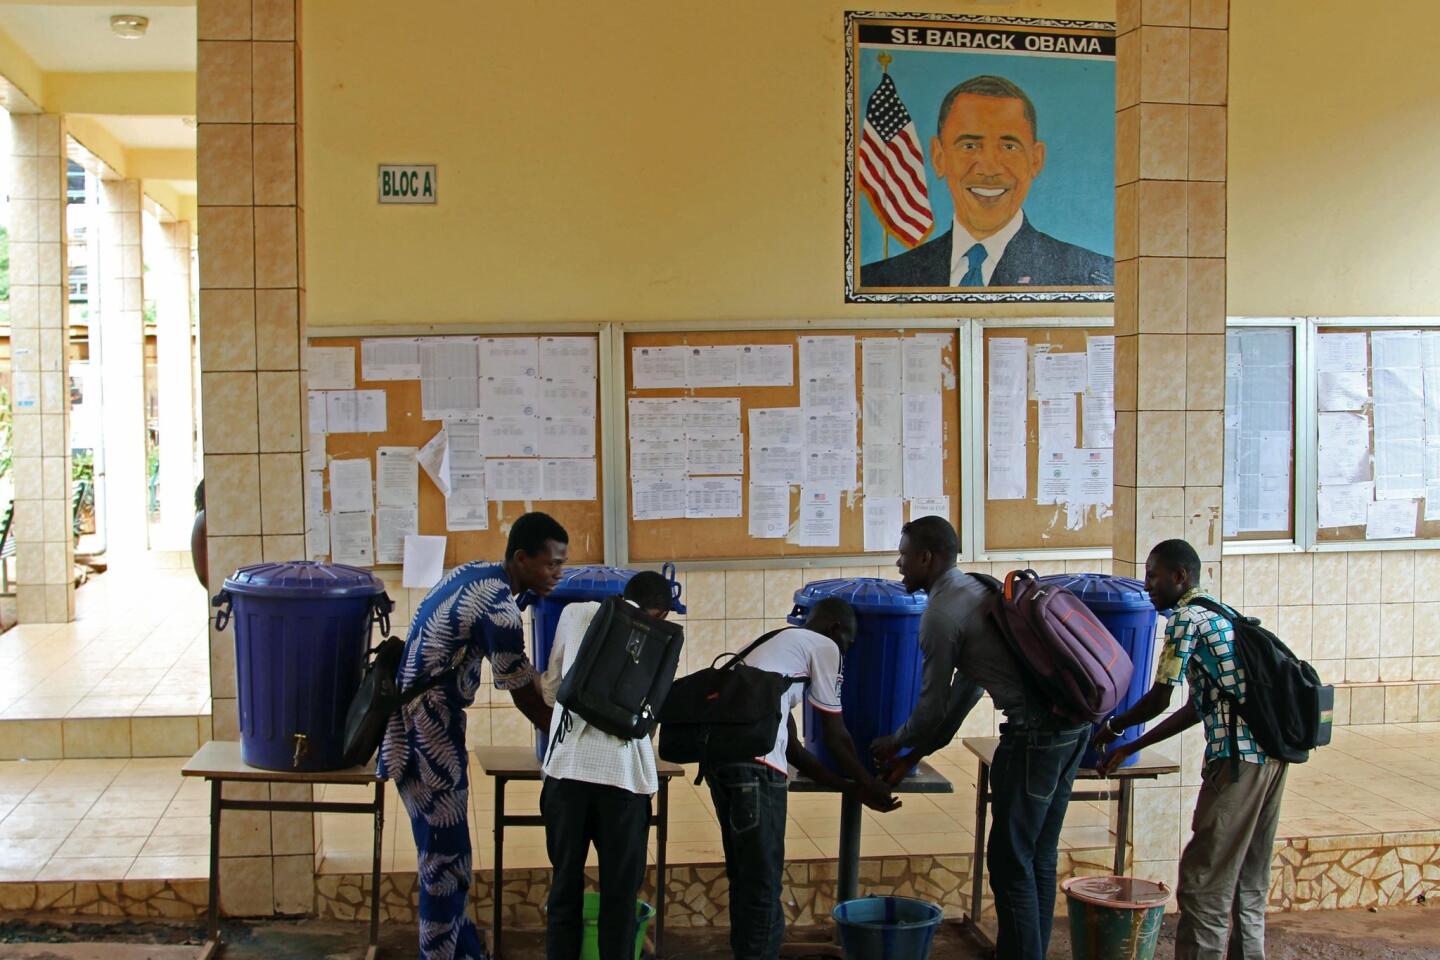 Images of Obama across Africa